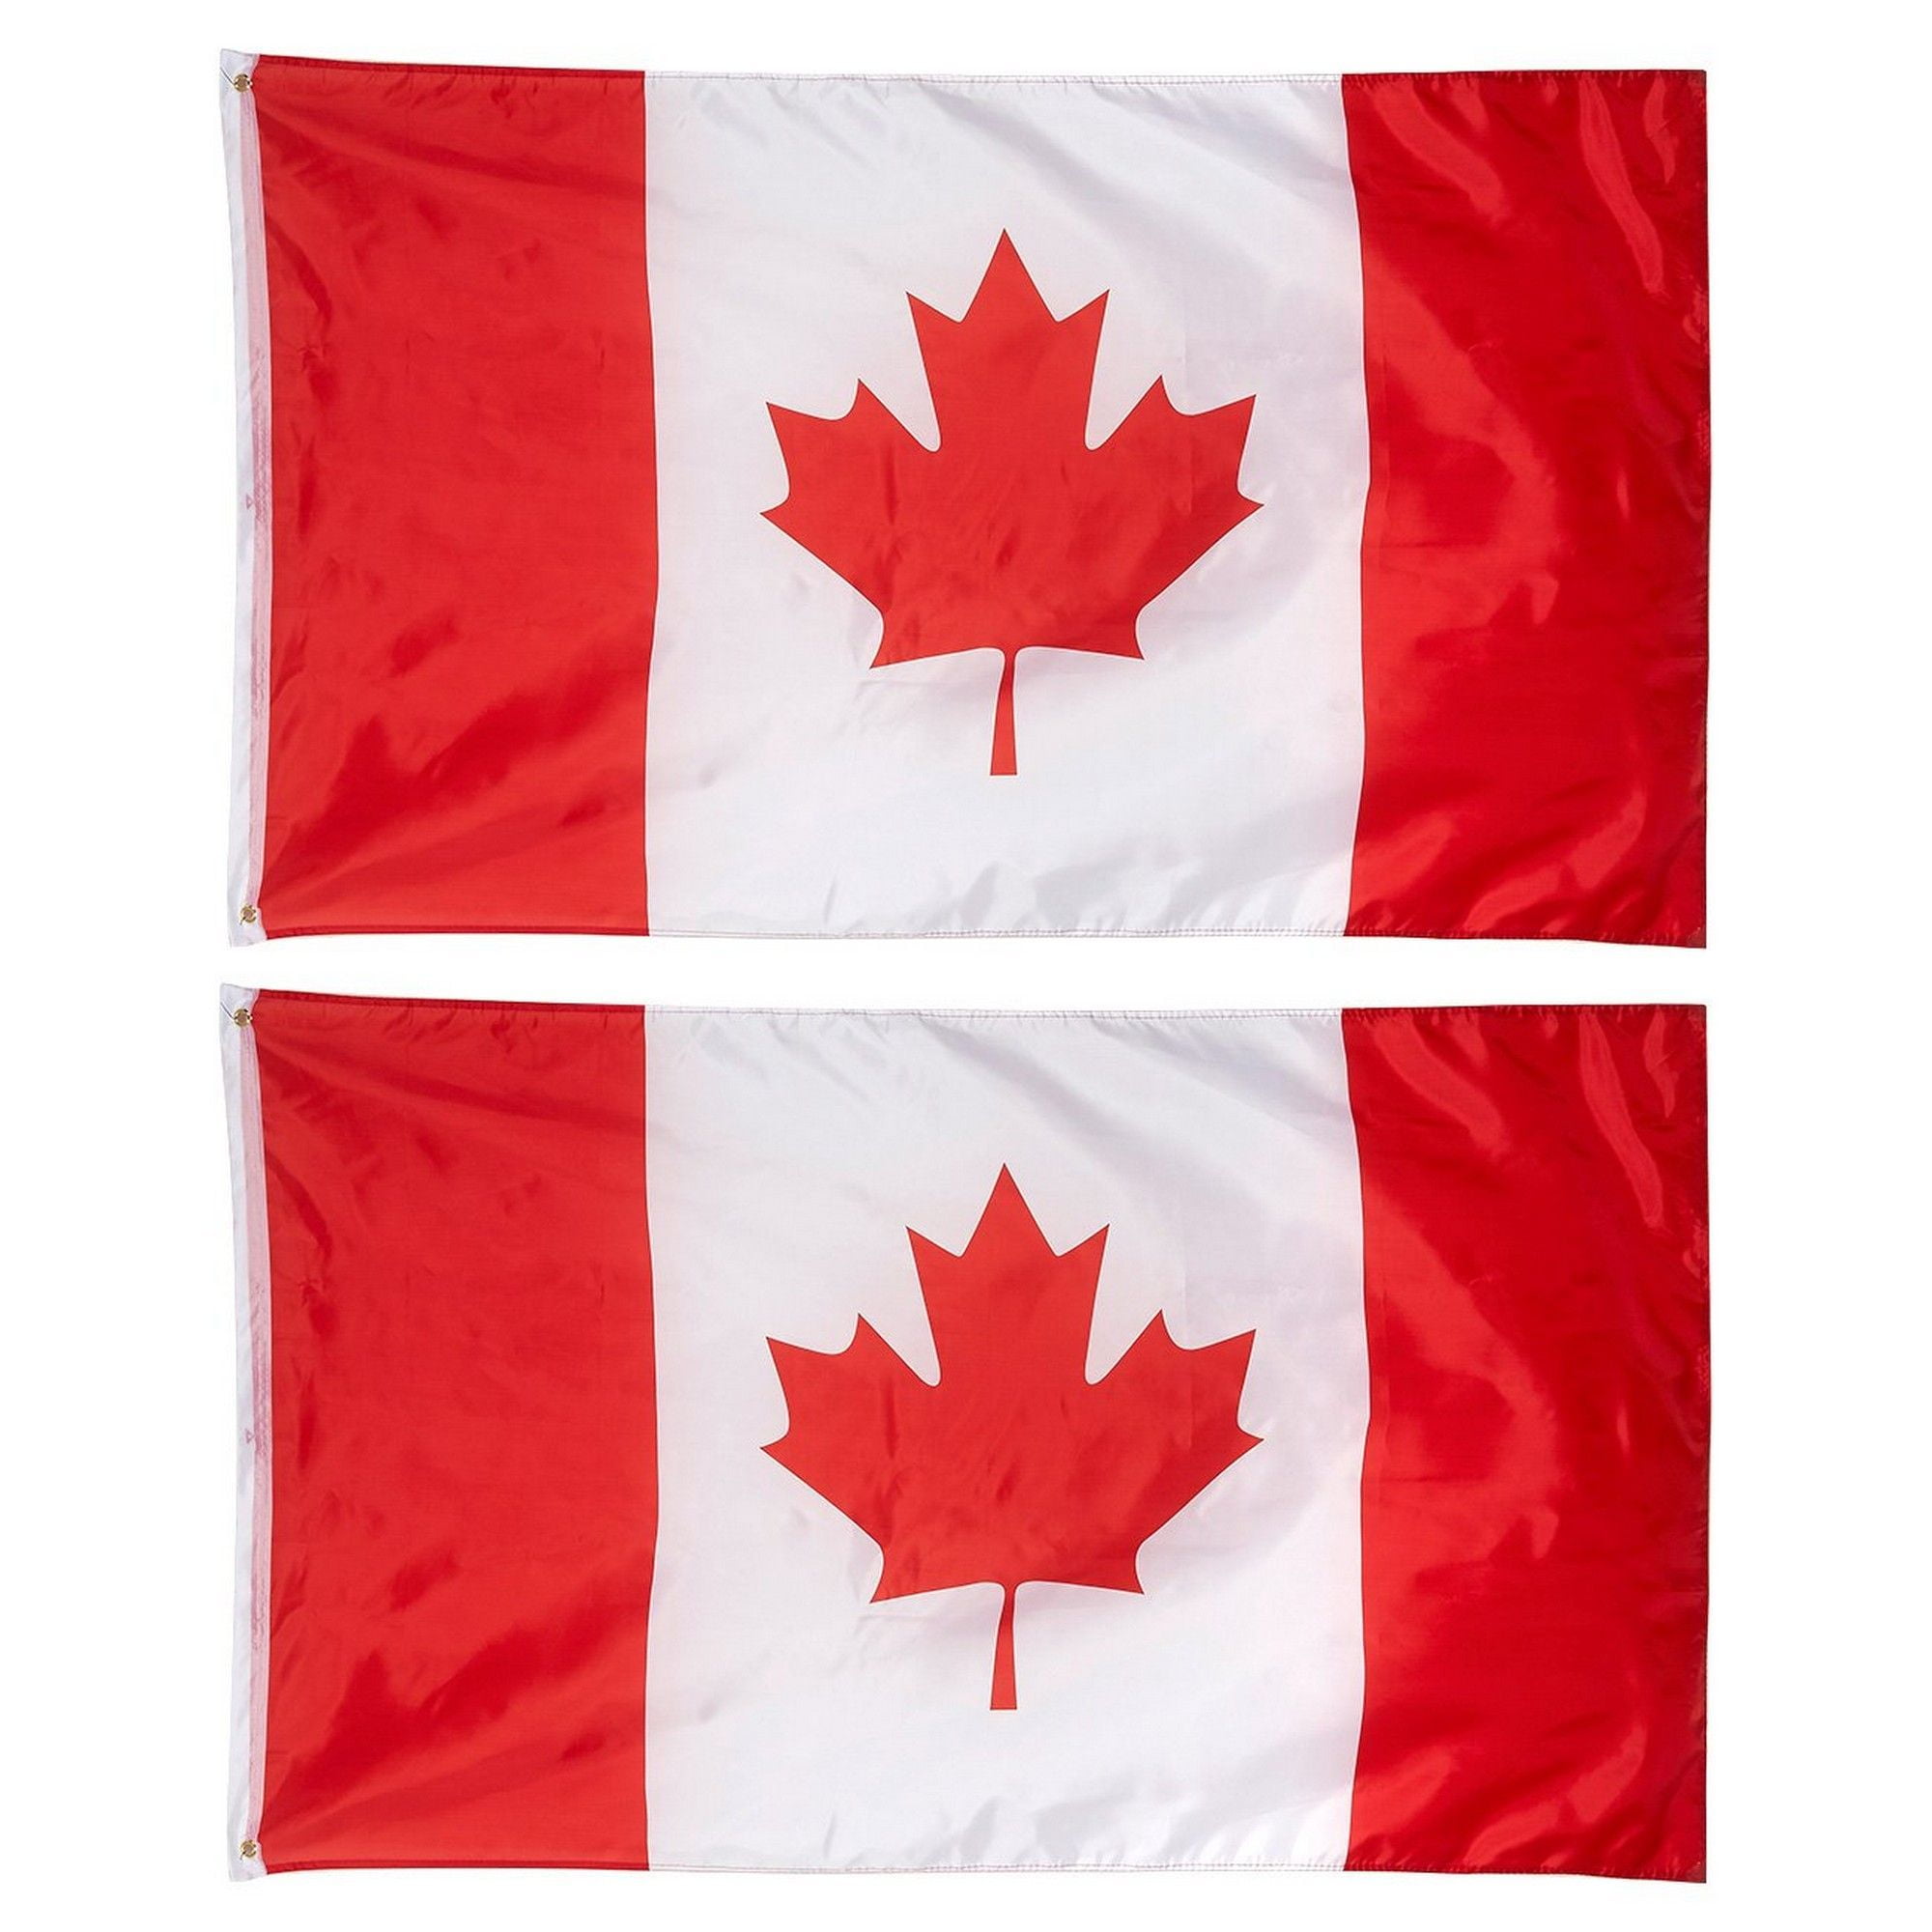 NEW 3x5 ft ONTARIO CANADA CANADIAN FLAG better quality usa seller